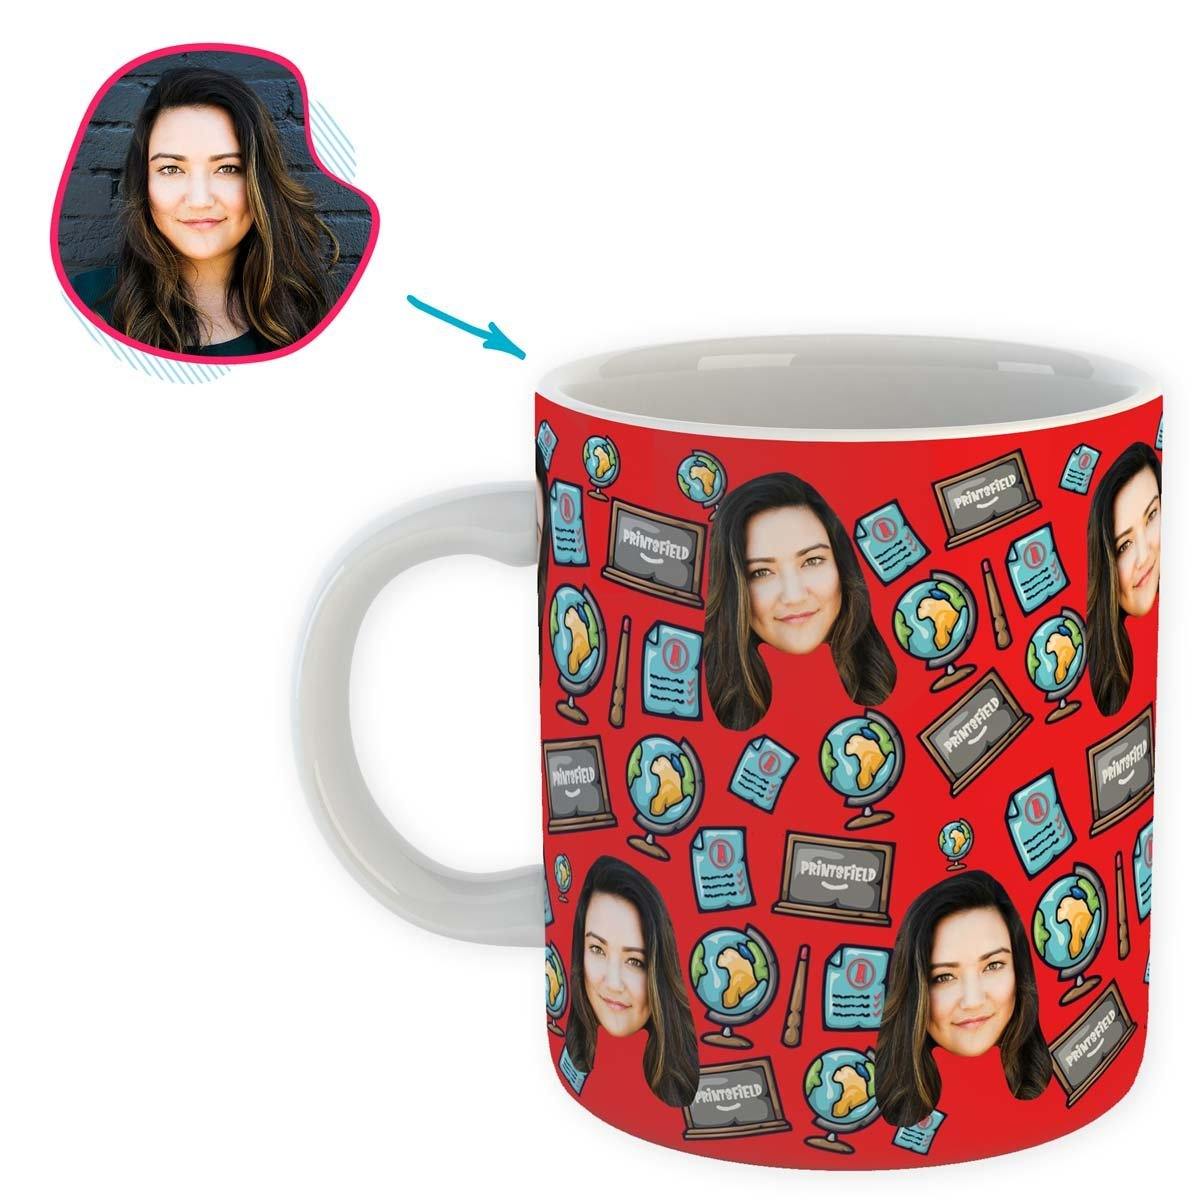 Red Teacher personalized mug with photo of face printed on it